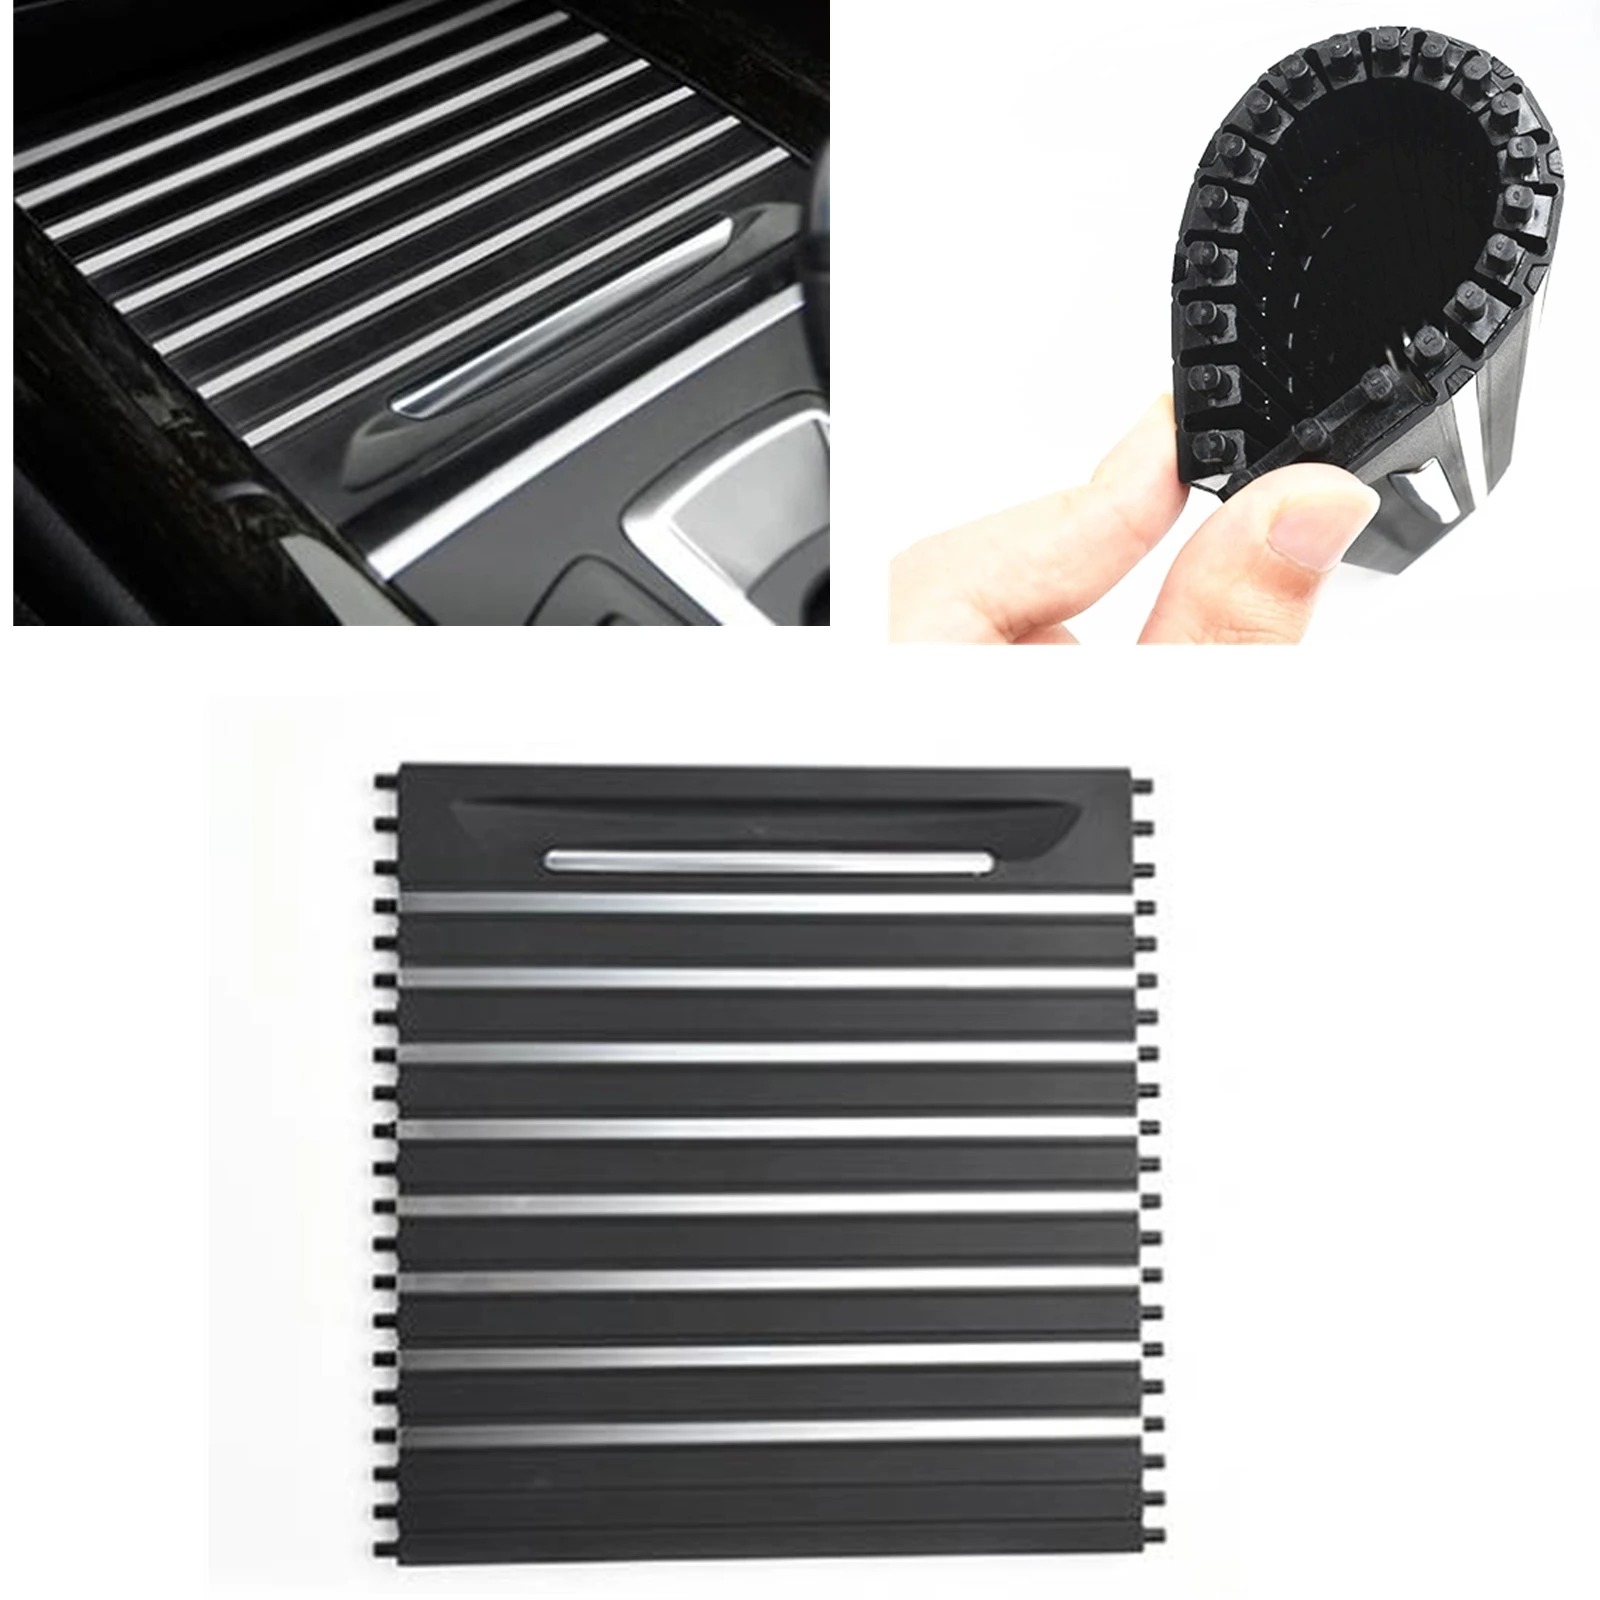 

Chrome Water Cup Holder Tray Roller Blind Cover Car Gear Center Drink Panel Louver Trim Shade For BMW X6 F15 F16 X5 X6 2015-2019